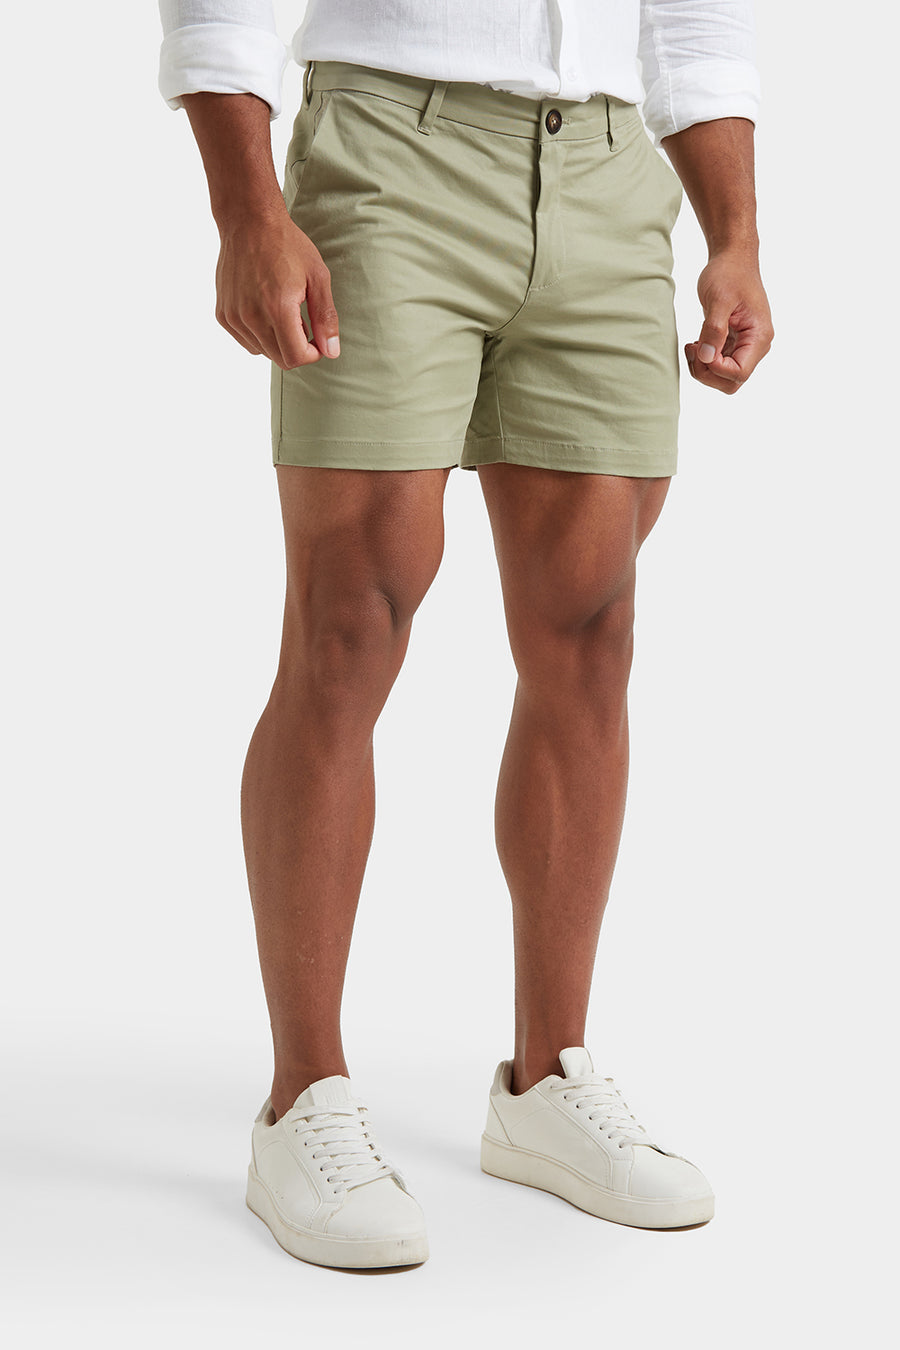 Athletic Fit Chino Shorts 5" in Sage - TAILORED ATHLETE - USA